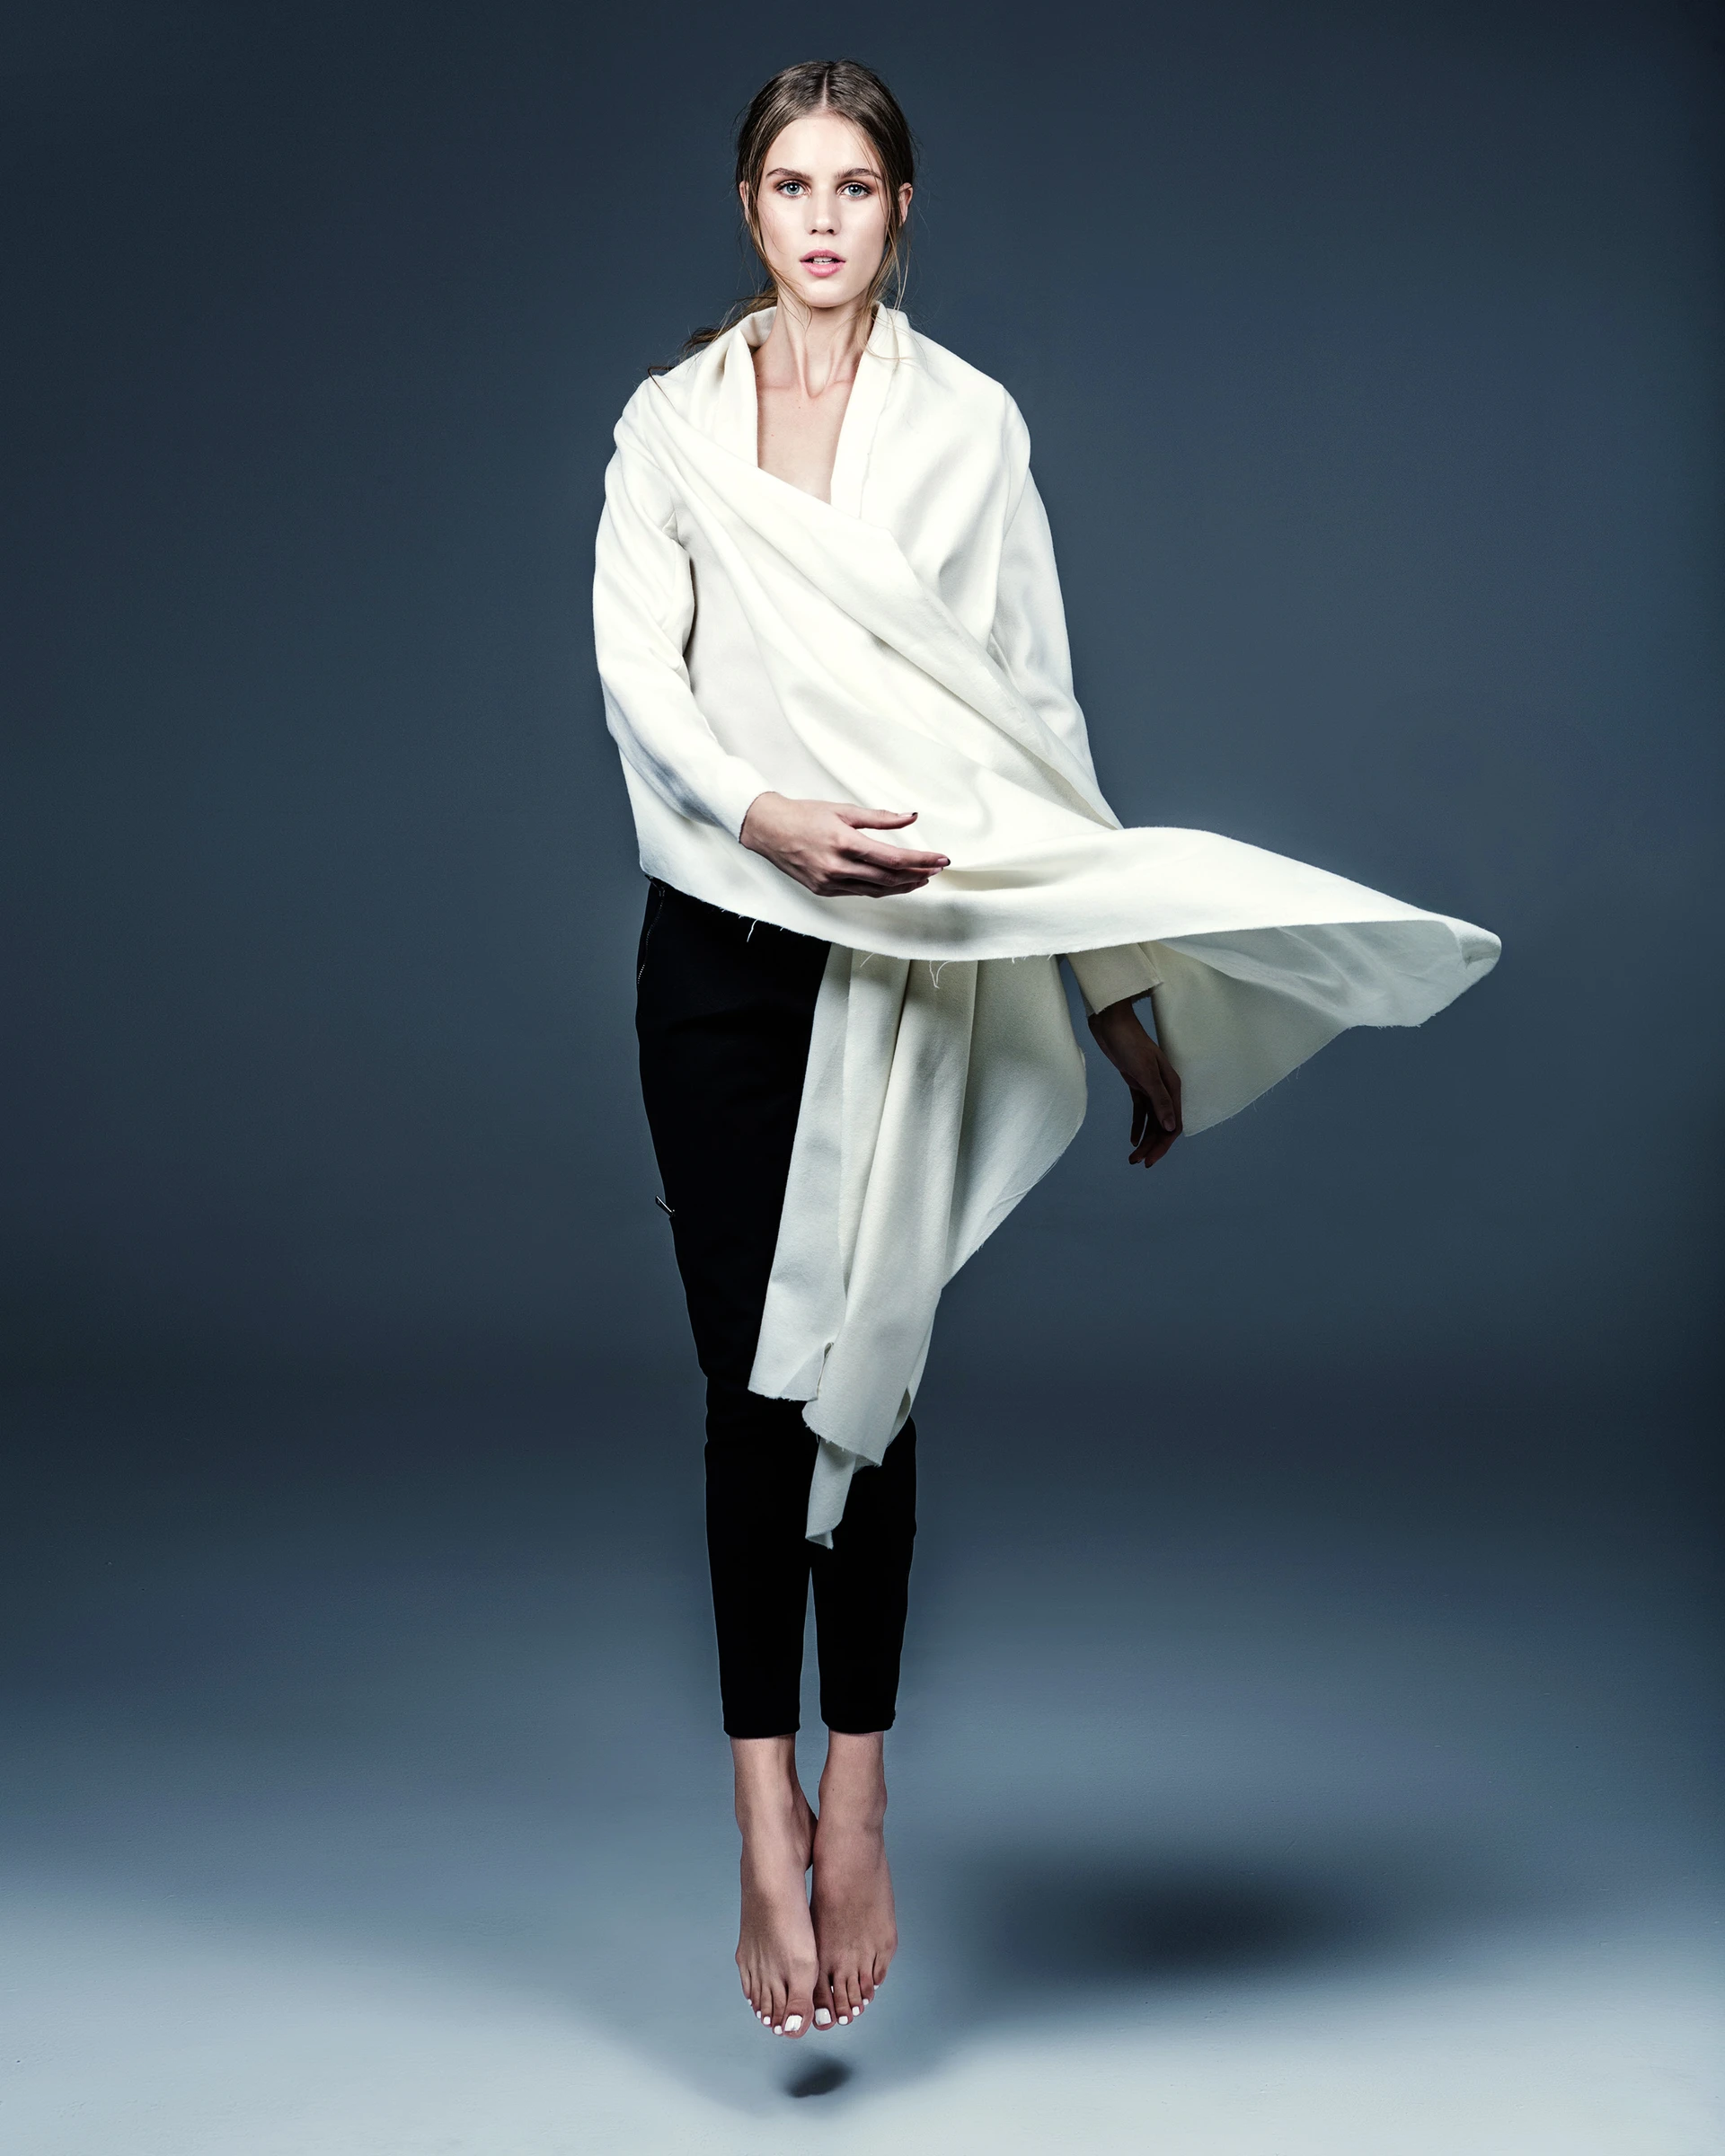 Full-length portrait of a woman in black pants and barefoot, draped in a flowing white fabric, set against a deep blue-gray background.